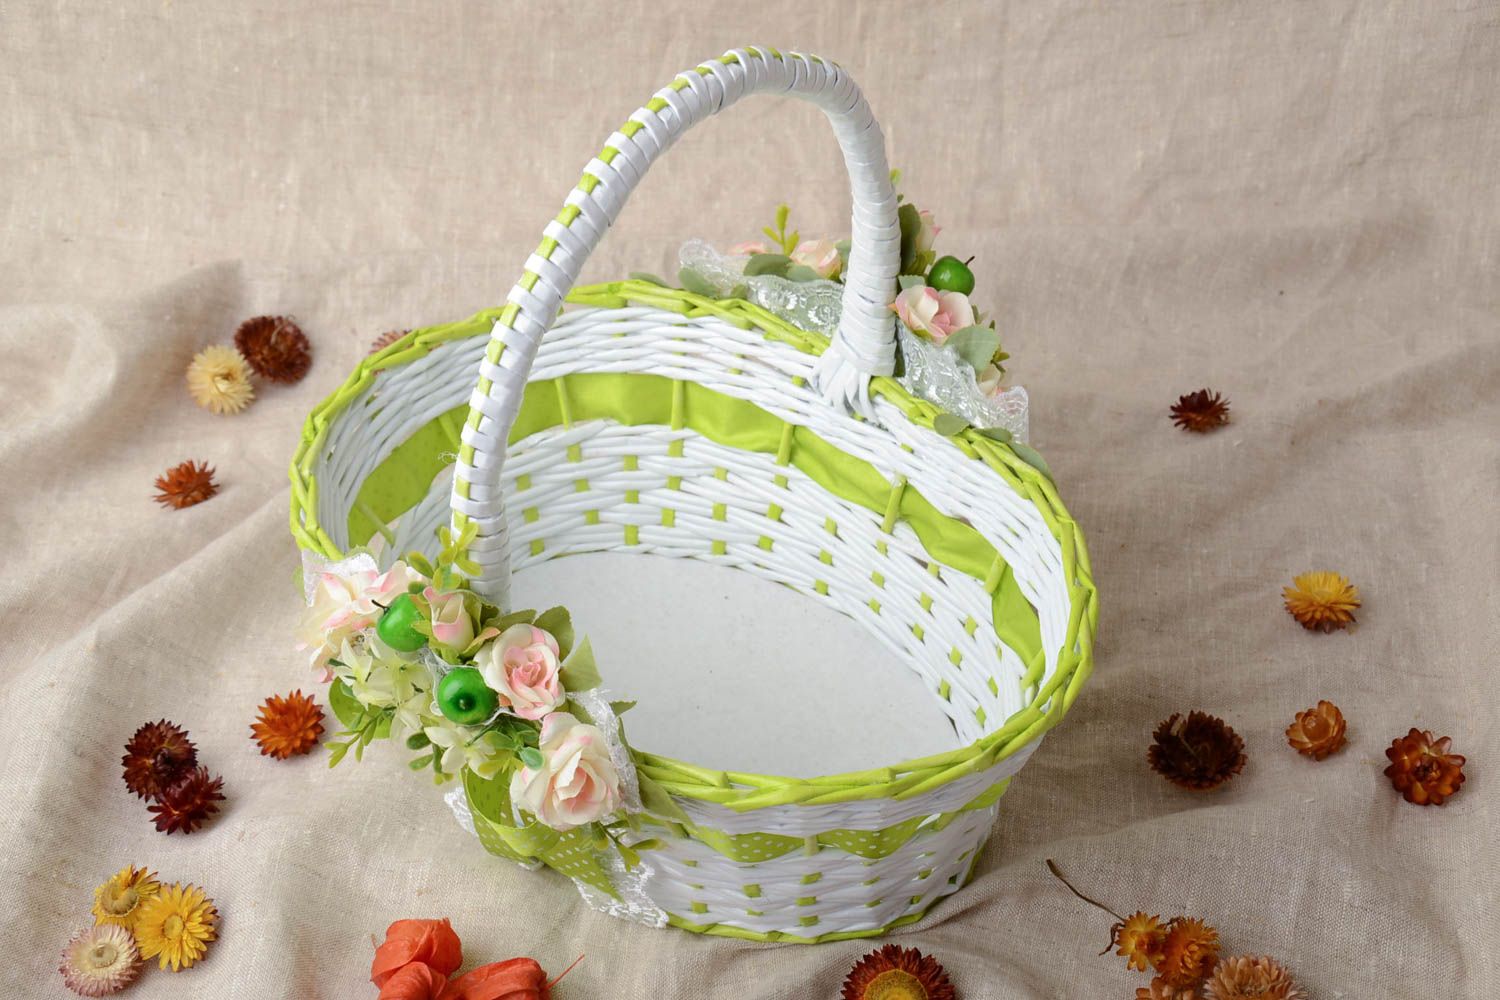 Newspaper basket decorated with flowers photo 1